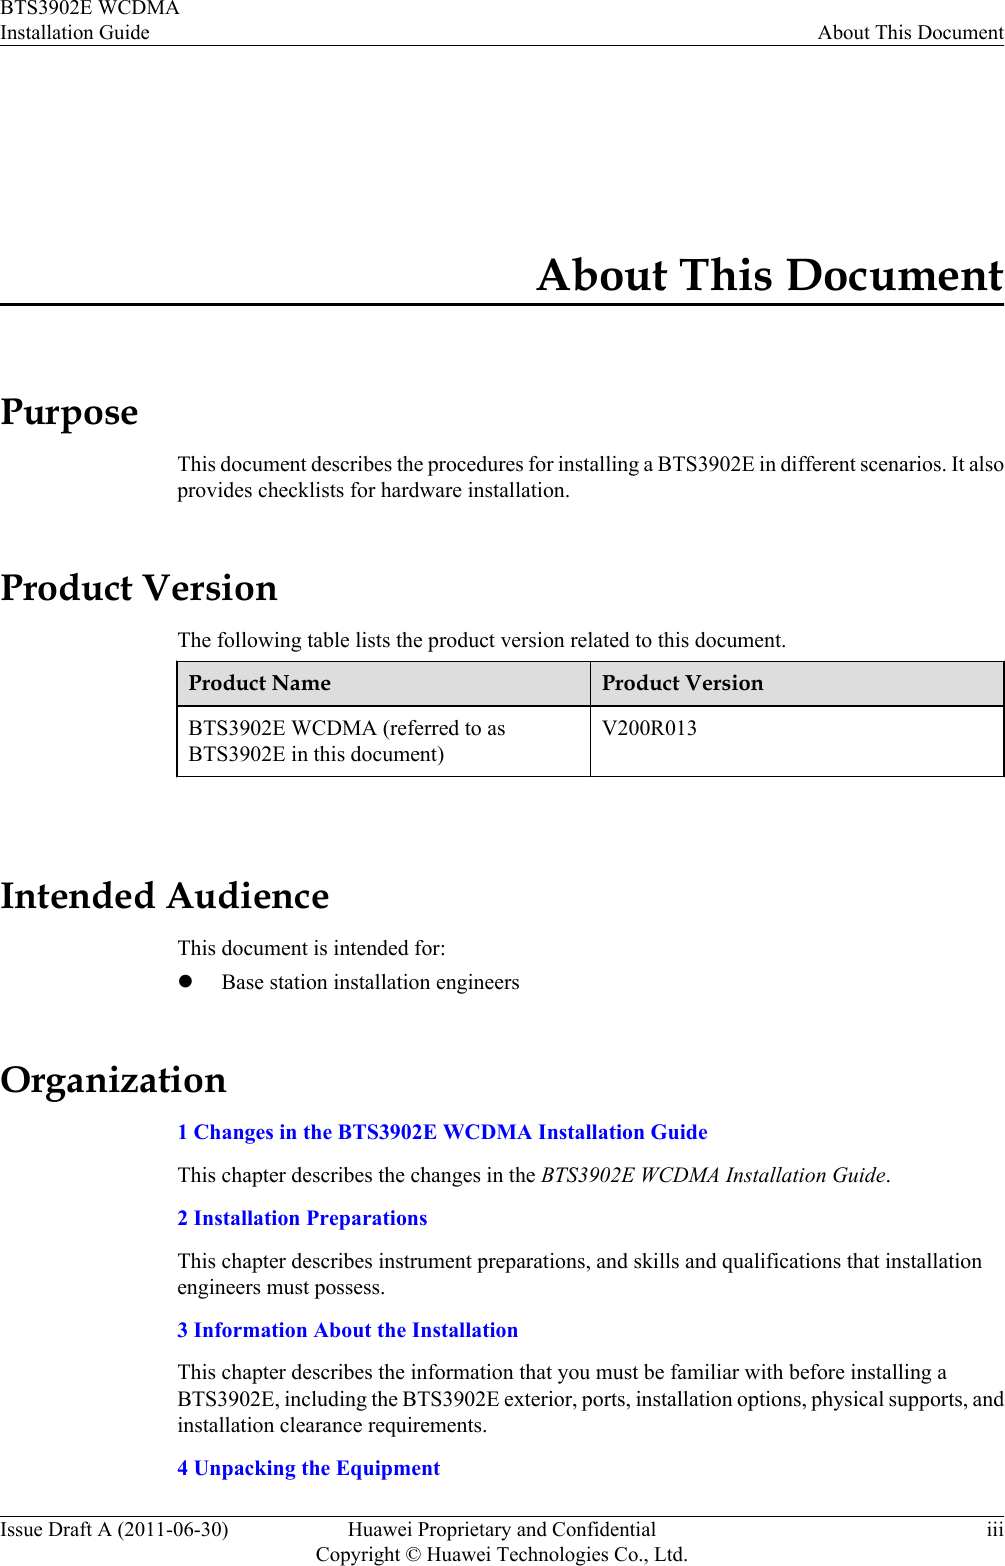 About This DocumentPurposeThis document describes the procedures for installing a BTS3902E in different scenarios. It alsoprovides checklists for hardware installation.Product VersionThe following table lists the product version related to this document.Product Name Product VersionBTS3902E WCDMA (referred to asBTS3902E in this document)V200R013 Intended AudienceThis document is intended for:lBase station installation engineersOrganization1 Changes in the BTS3902E WCDMA Installation GuideThis chapter describes the changes in the BTS3902E WCDMA Installation Guide.2 Installation PreparationsThis chapter describes instrument preparations, and skills and qualifications that installationengineers must possess.3 Information About the InstallationThis chapter describes the information that you must be familiar with before installing aBTS3902E, including the BTS3902E exterior, ports, installation options, physical supports, andinstallation clearance requirements.4 Unpacking the EquipmentBTS3902E WCDMAInstallation Guide About This DocumentIssue Draft A (2011-06-30) Huawei Proprietary and ConfidentialCopyright © Huawei Technologies Co., Ltd.iii